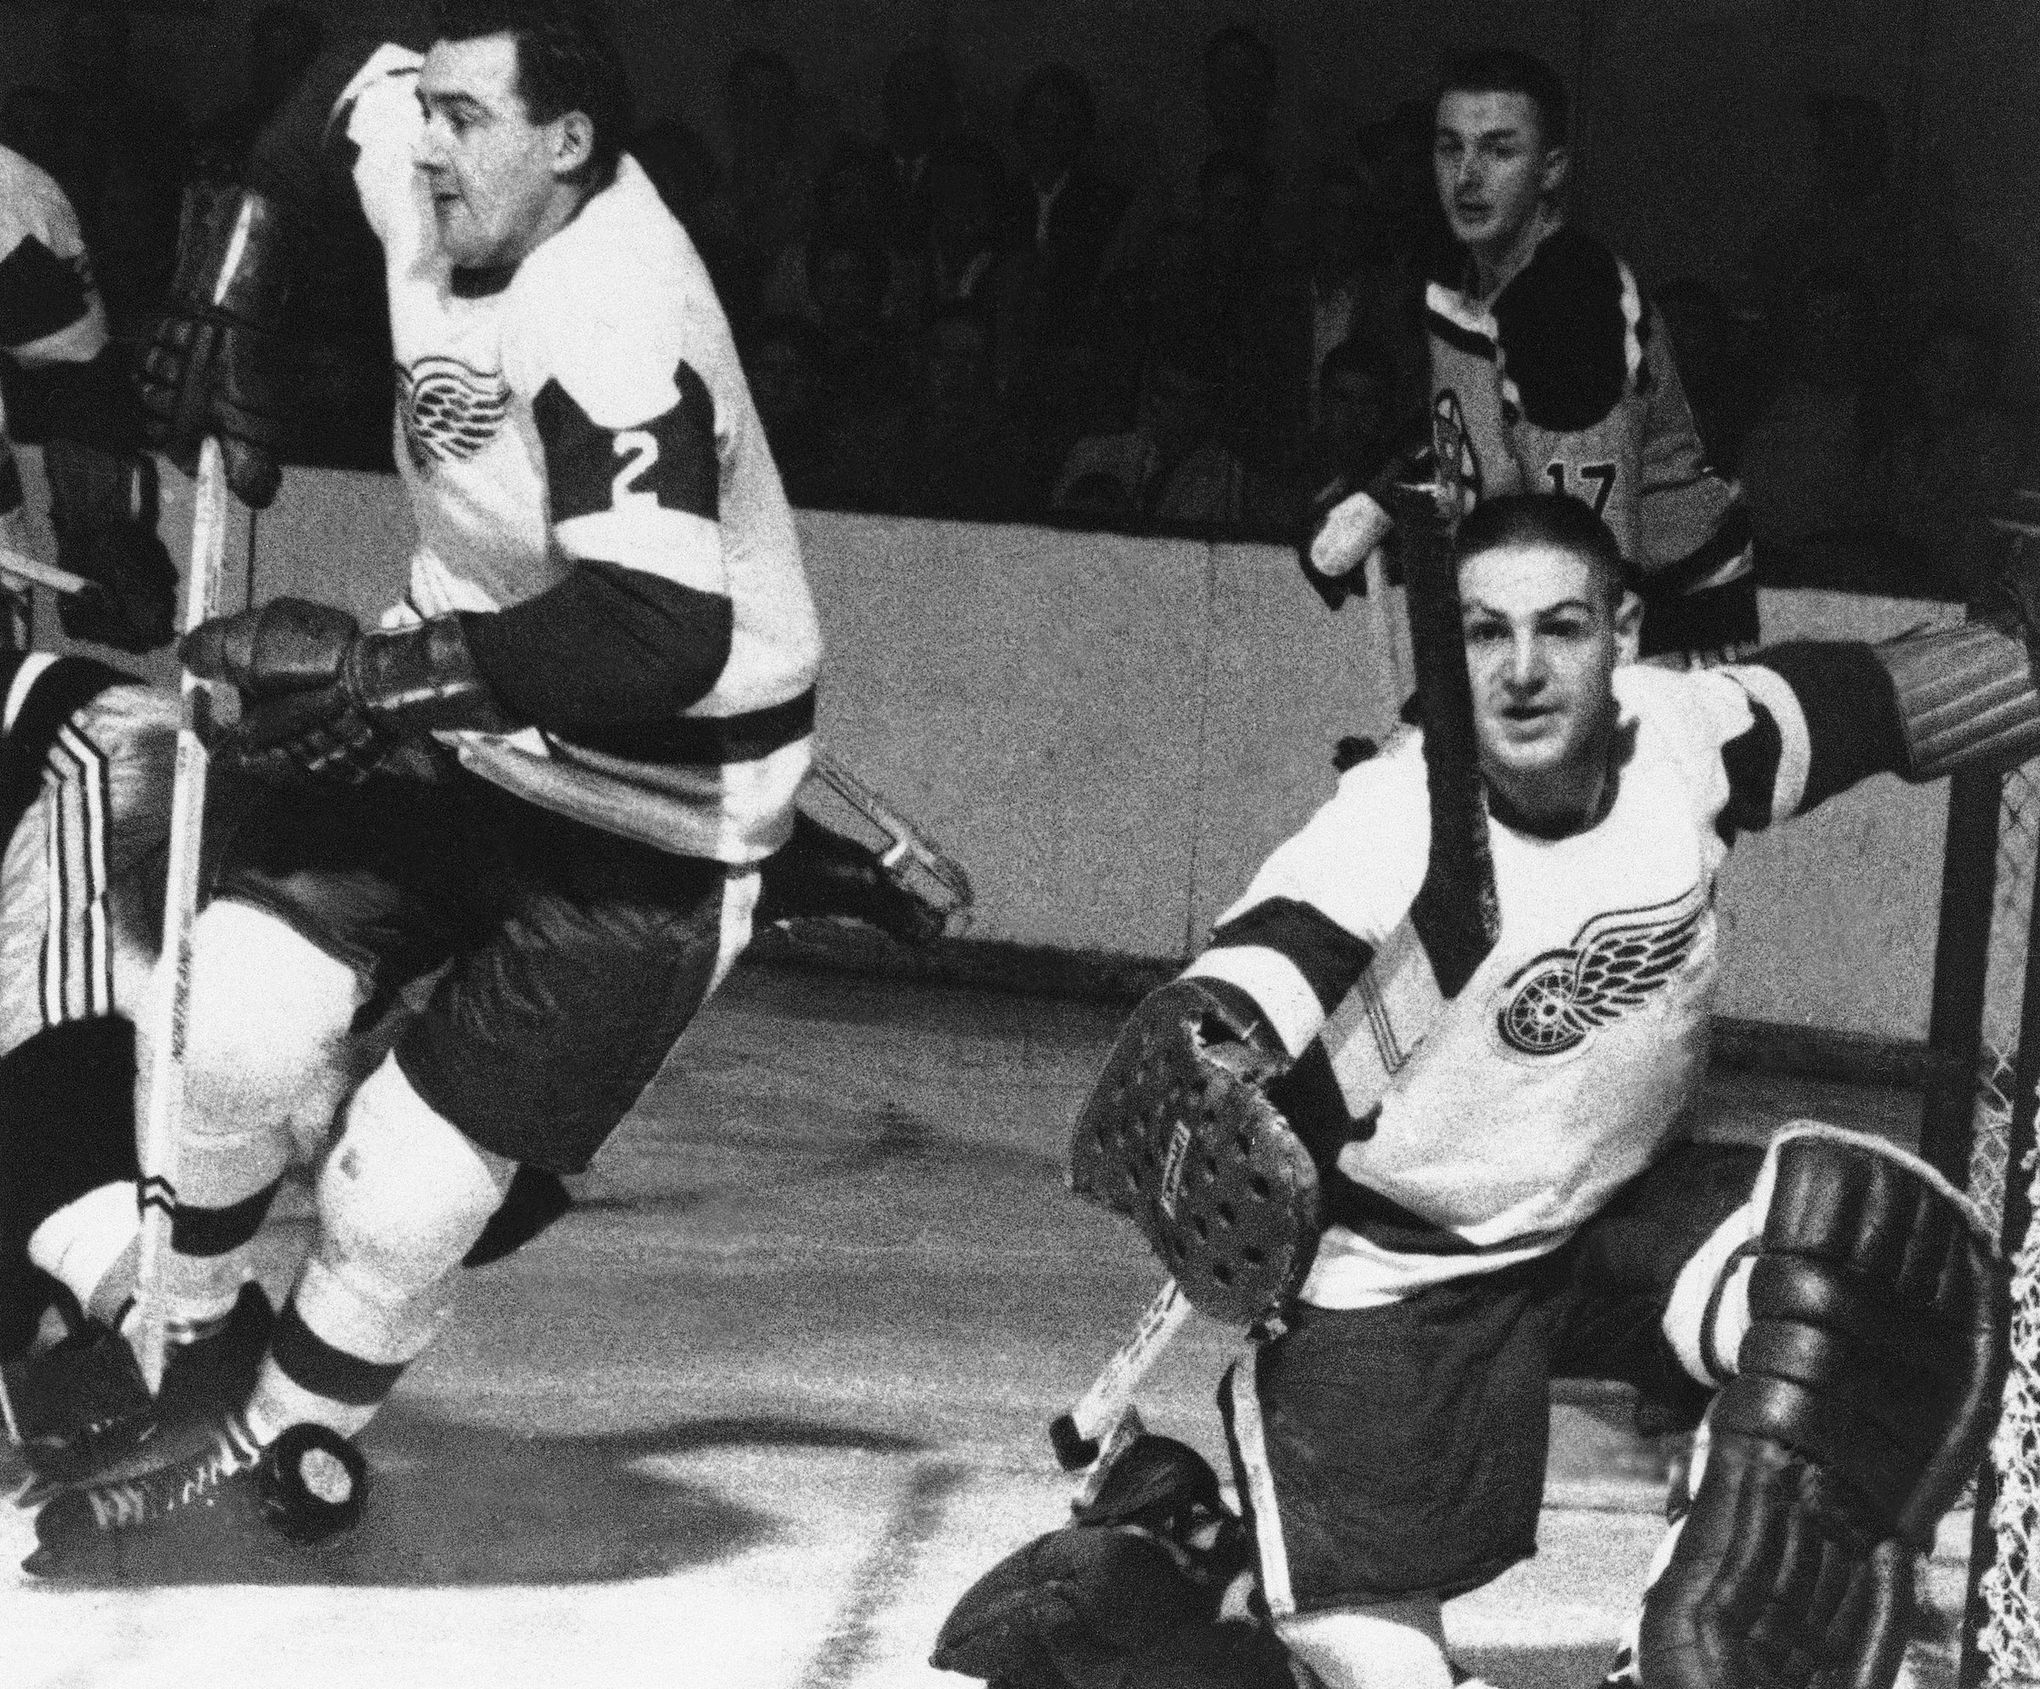 Goalie: NHL Hall of Famer Terry Sawchuk's life told as painful